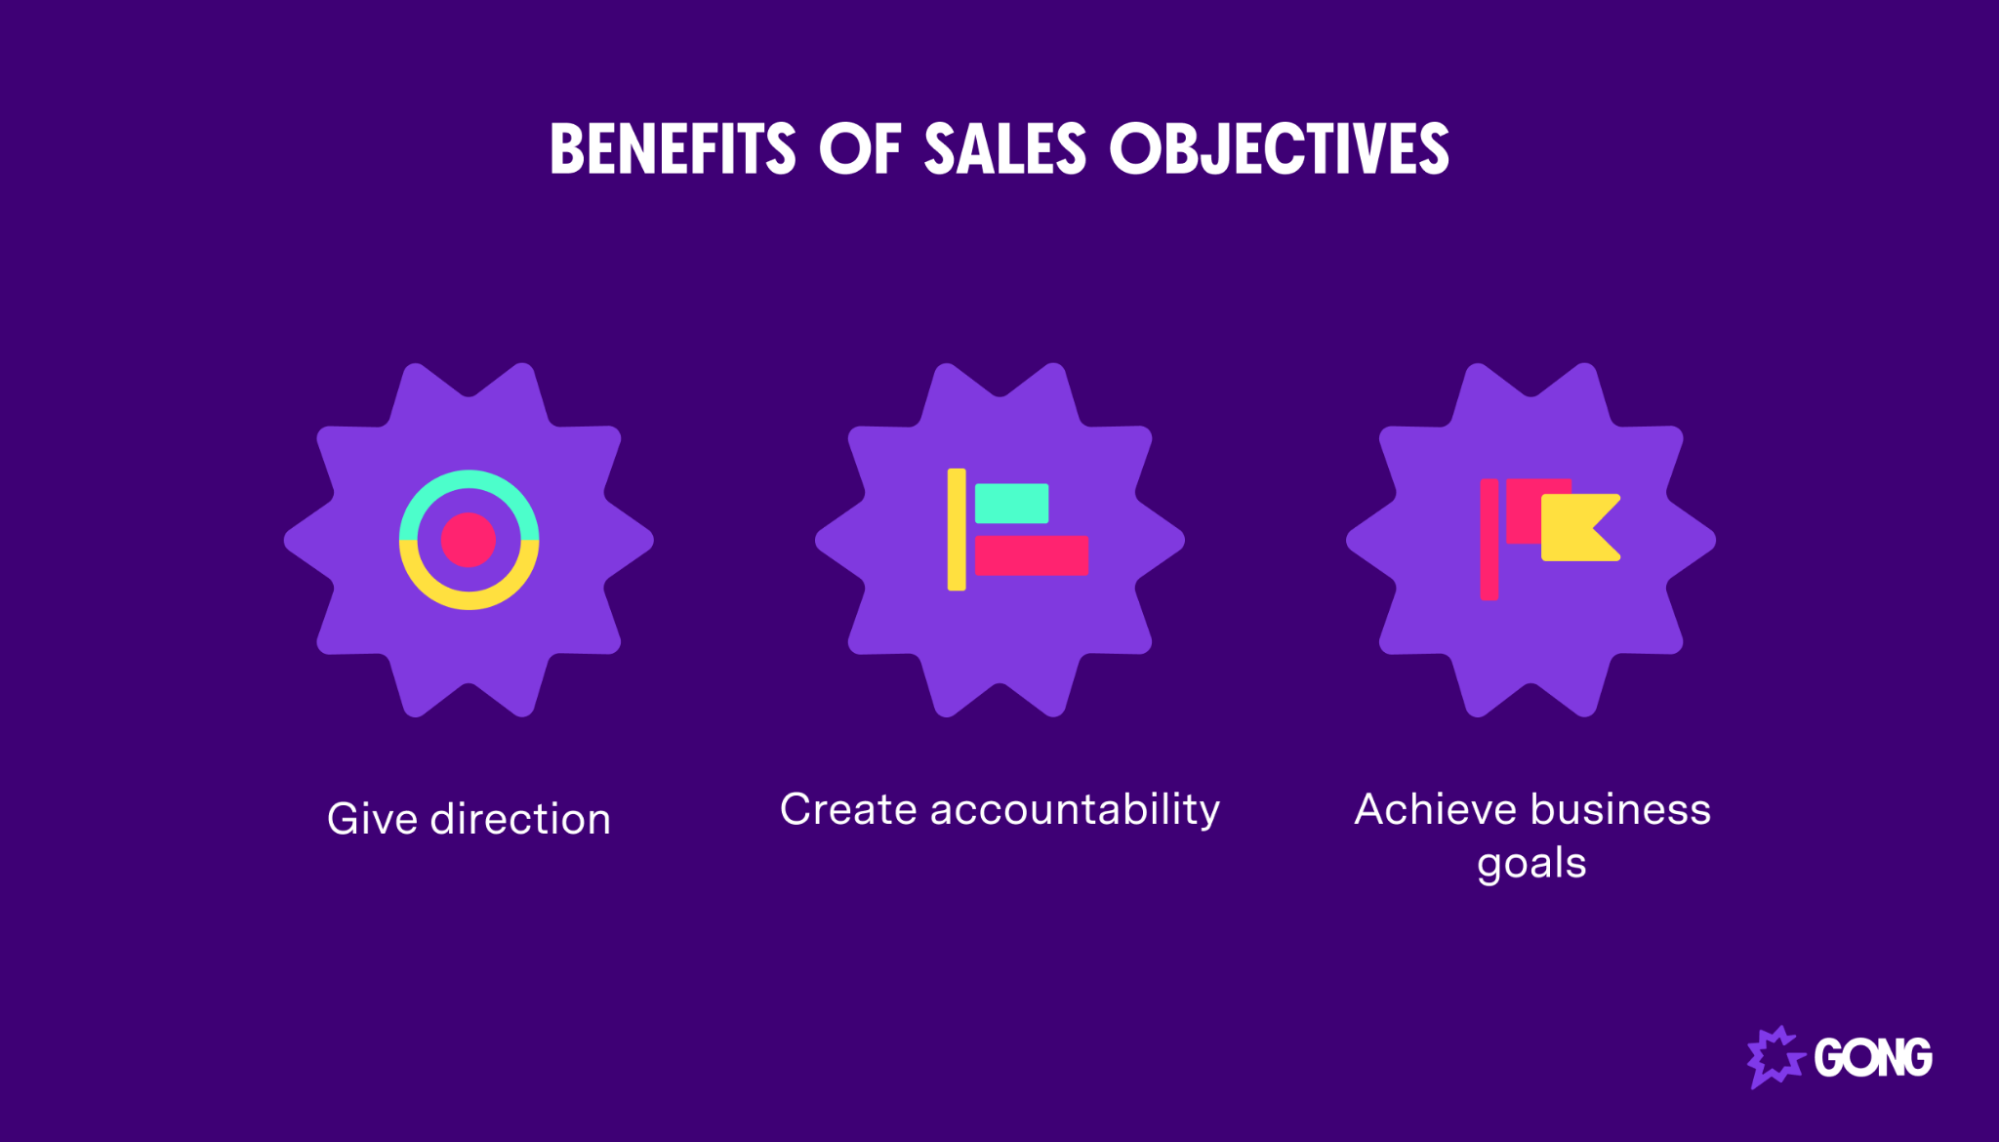 The three benefits of sales objectives